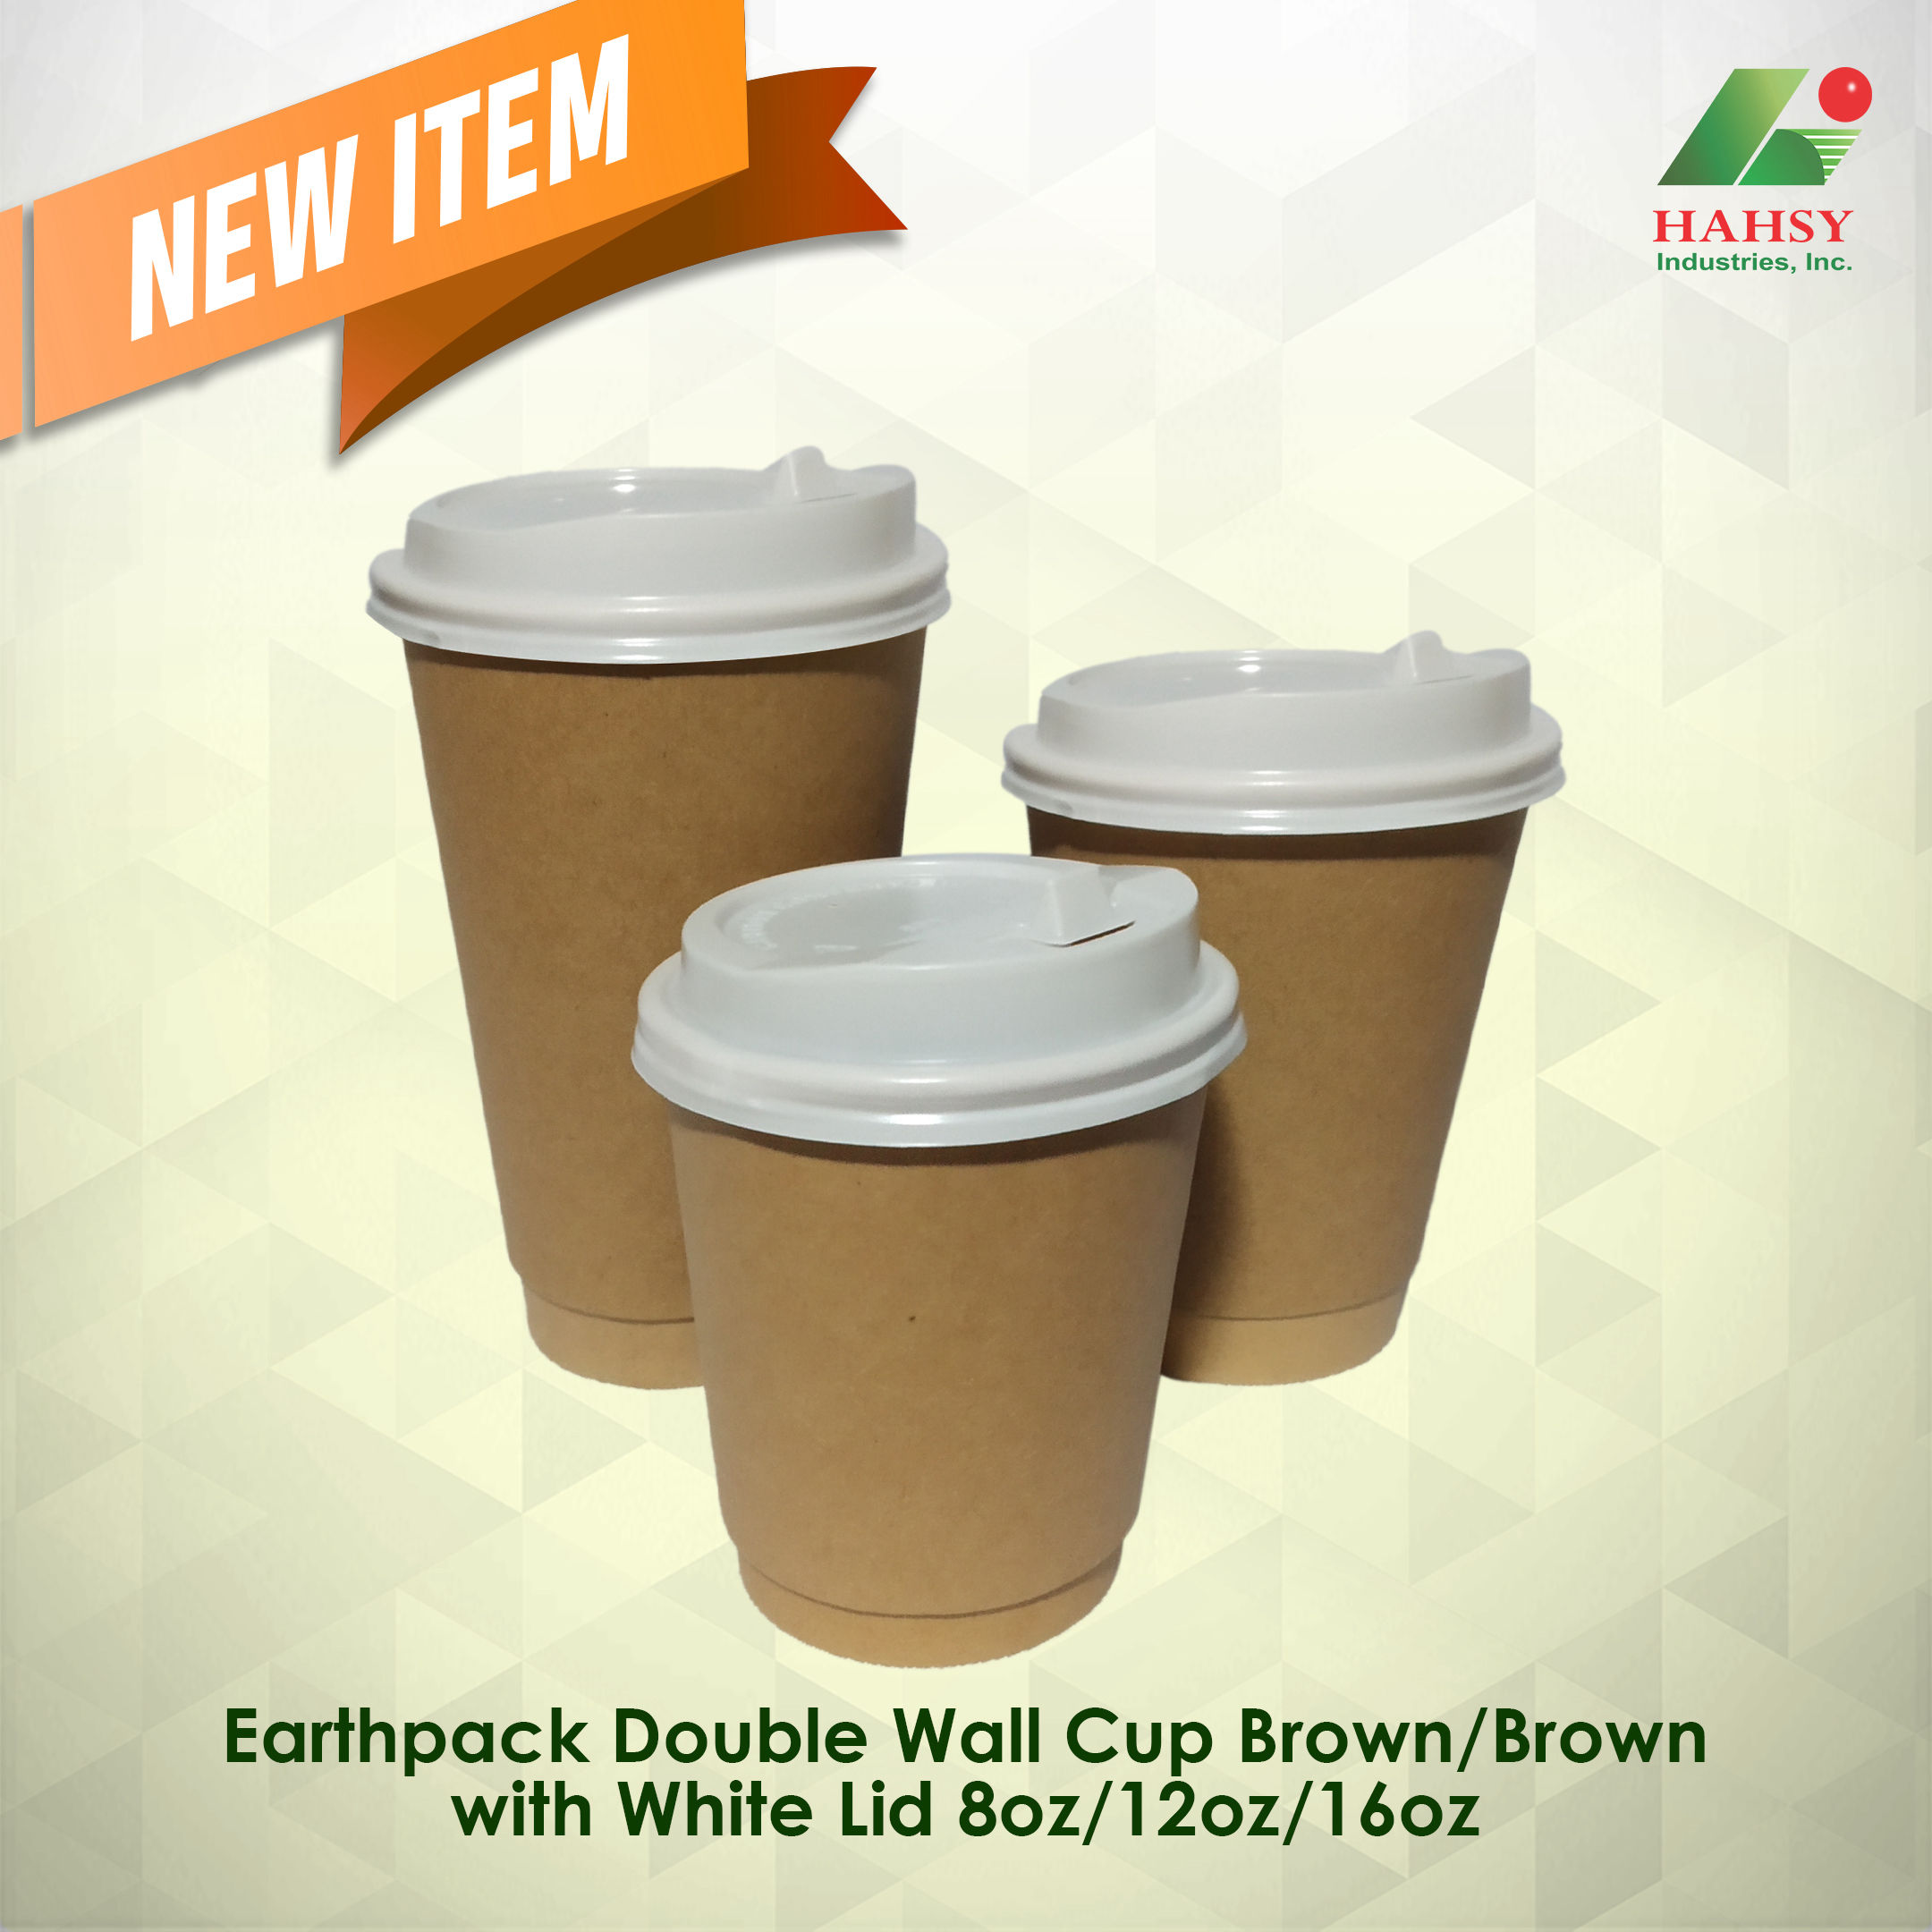 Earthpack Double wall cup brown with white lid 12oz 16oz